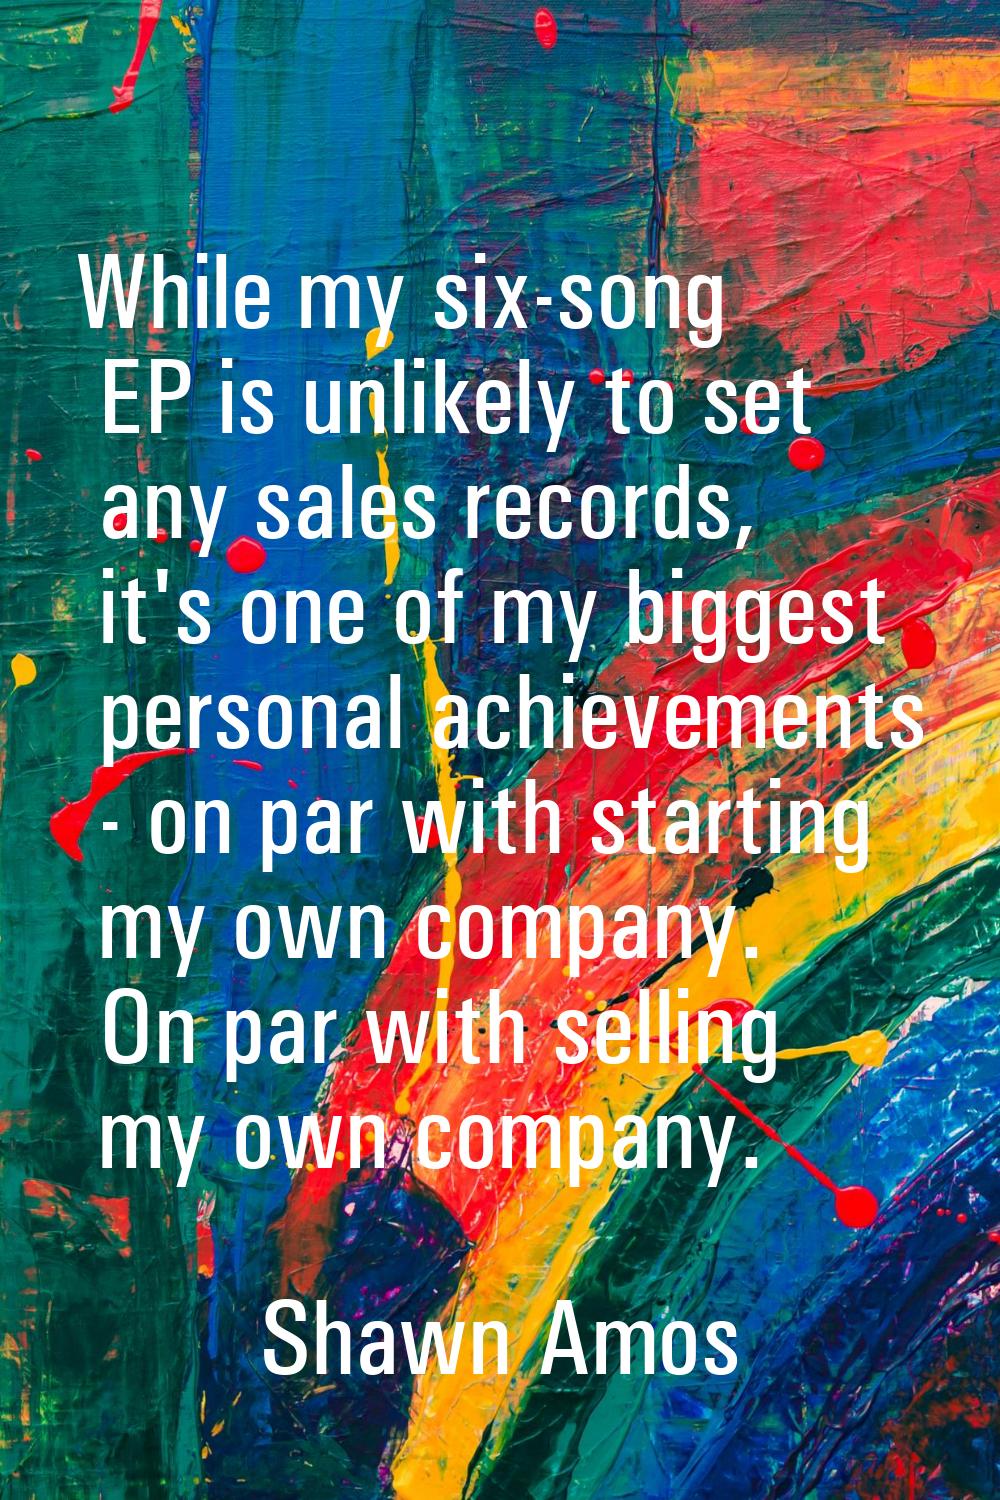 While my six-song EP is unlikely to set any sales records, it's one of my biggest personal achievem